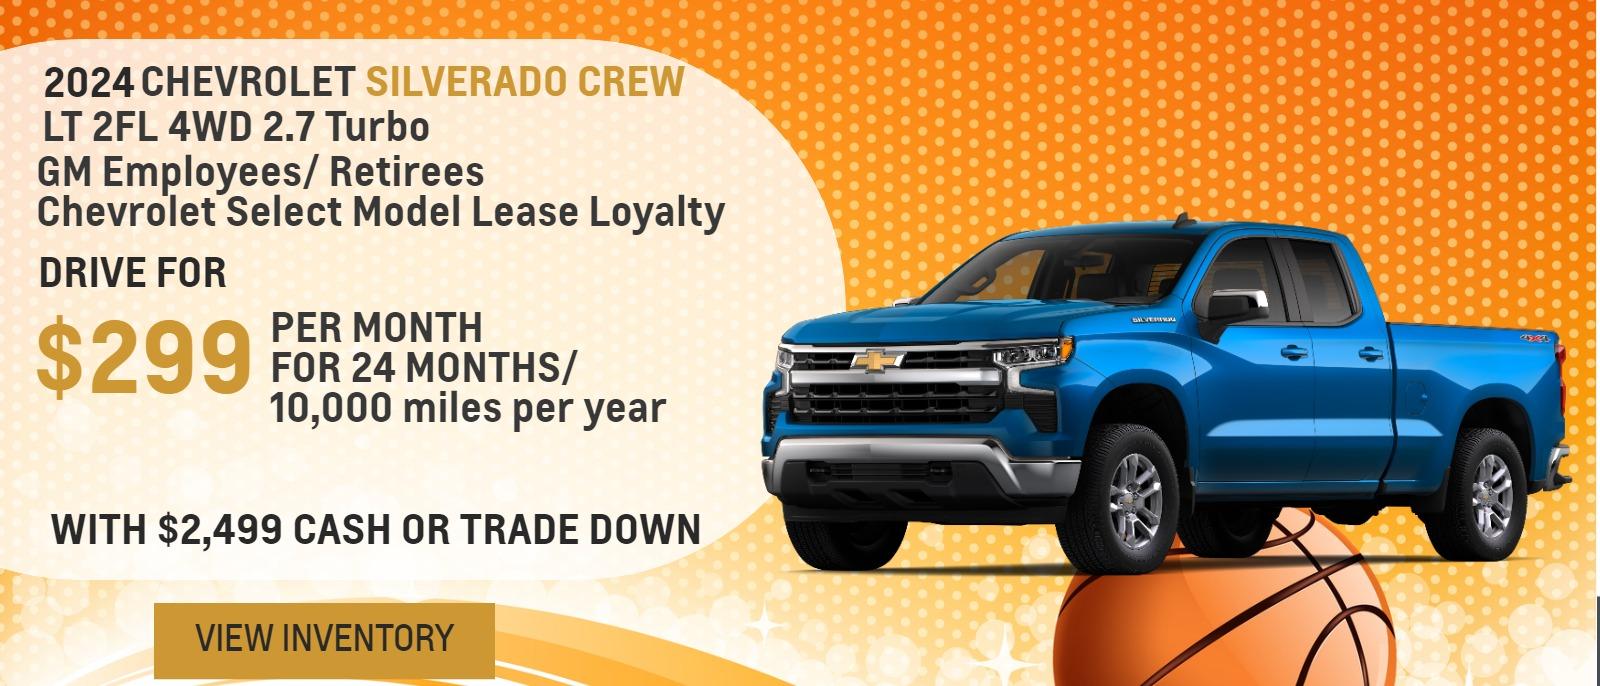 2024 Silverado Crew LT 2FL 4WD 2.7 Turbo
GM Employees/ Retirees
Chevrolet Select Model Lease Loyalty

Drive for $299 per month
24 Months / 10,000 miles per year
With $2,499 cash or trade down